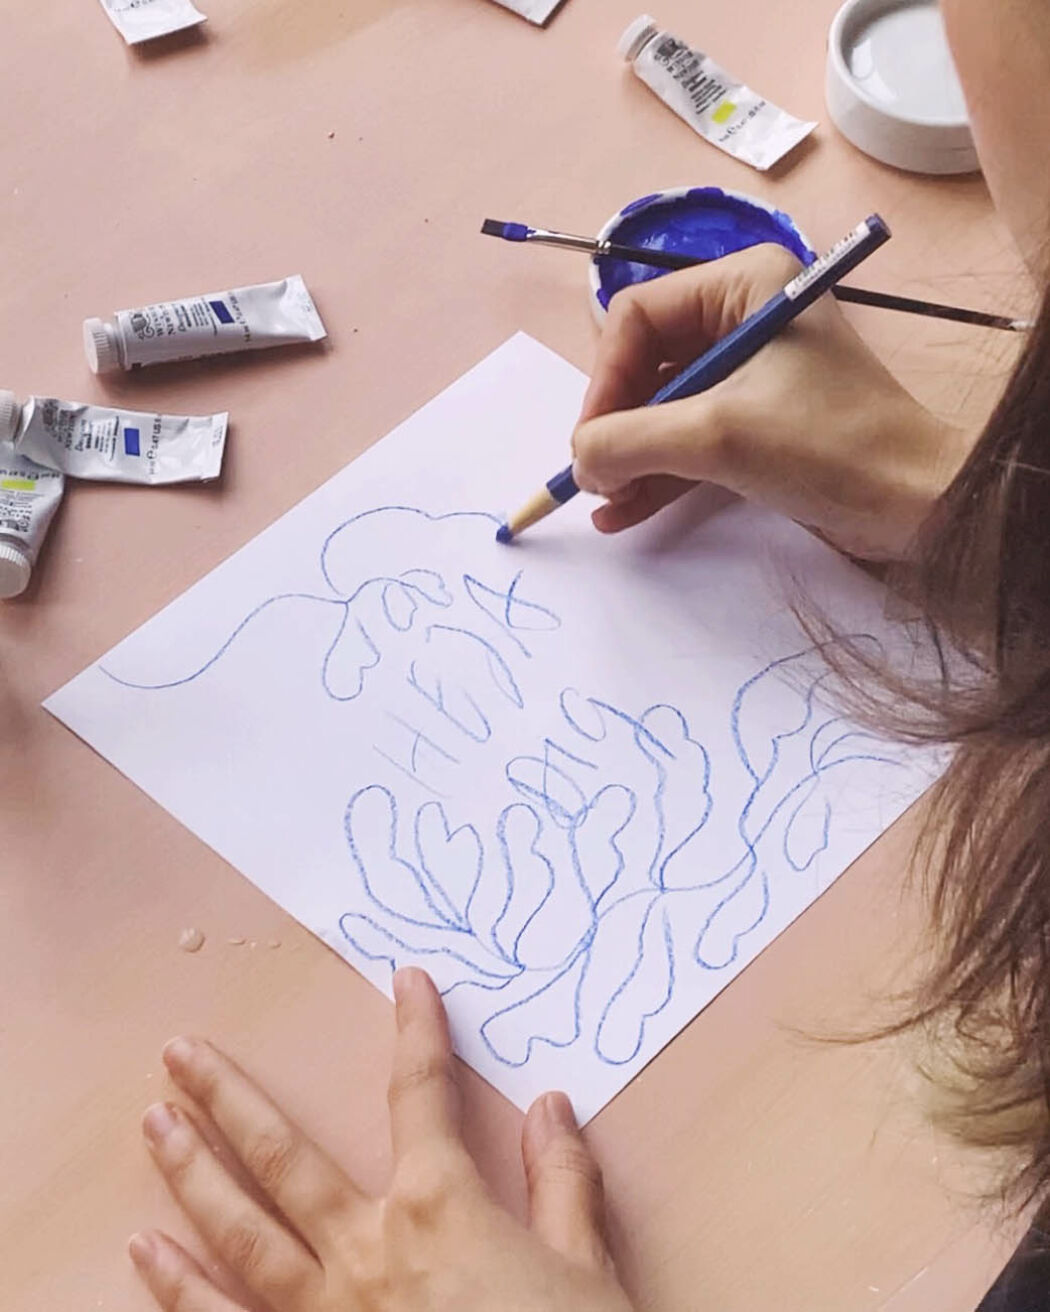 The artist Linnéa Andersson in her studio working with sketches for a tech brand